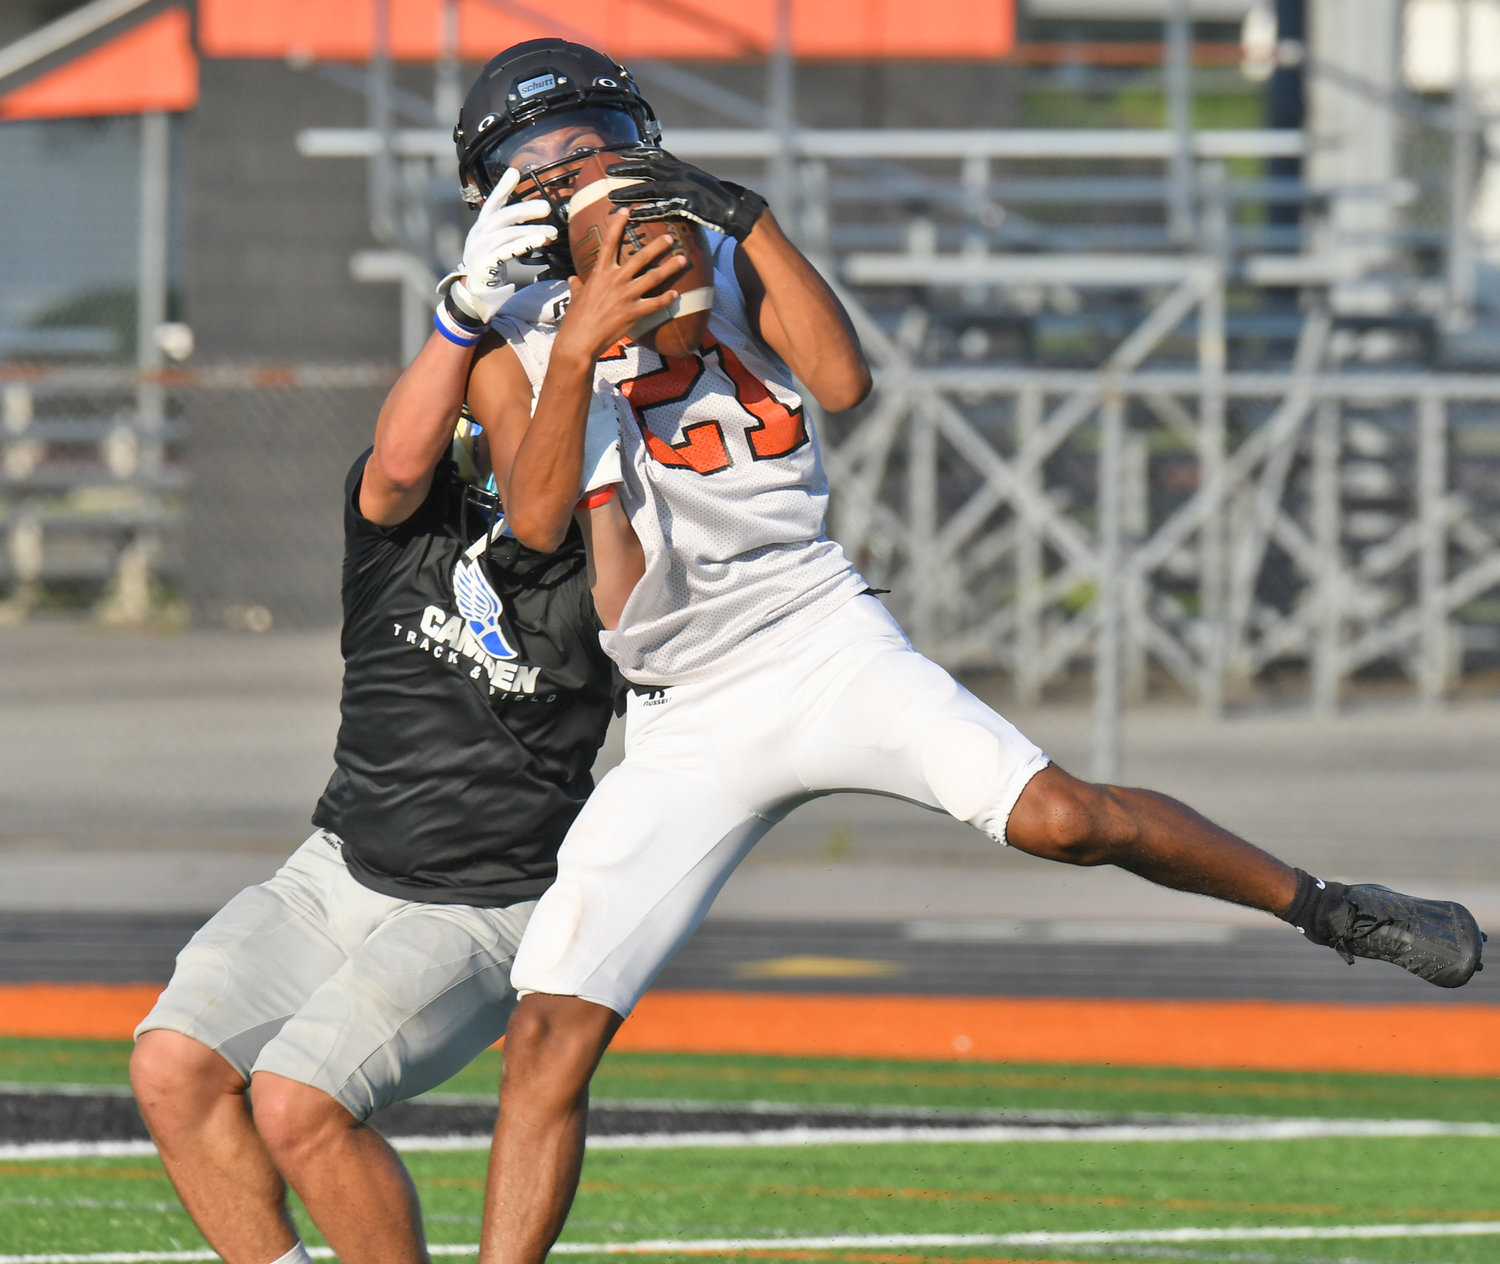 Matthew Lambert of Rome Free Academy makes a catch in front of Camden defender Robby Jackson during a seven-on-seven scrimmage on Aug. 29 at RFA Stadium.